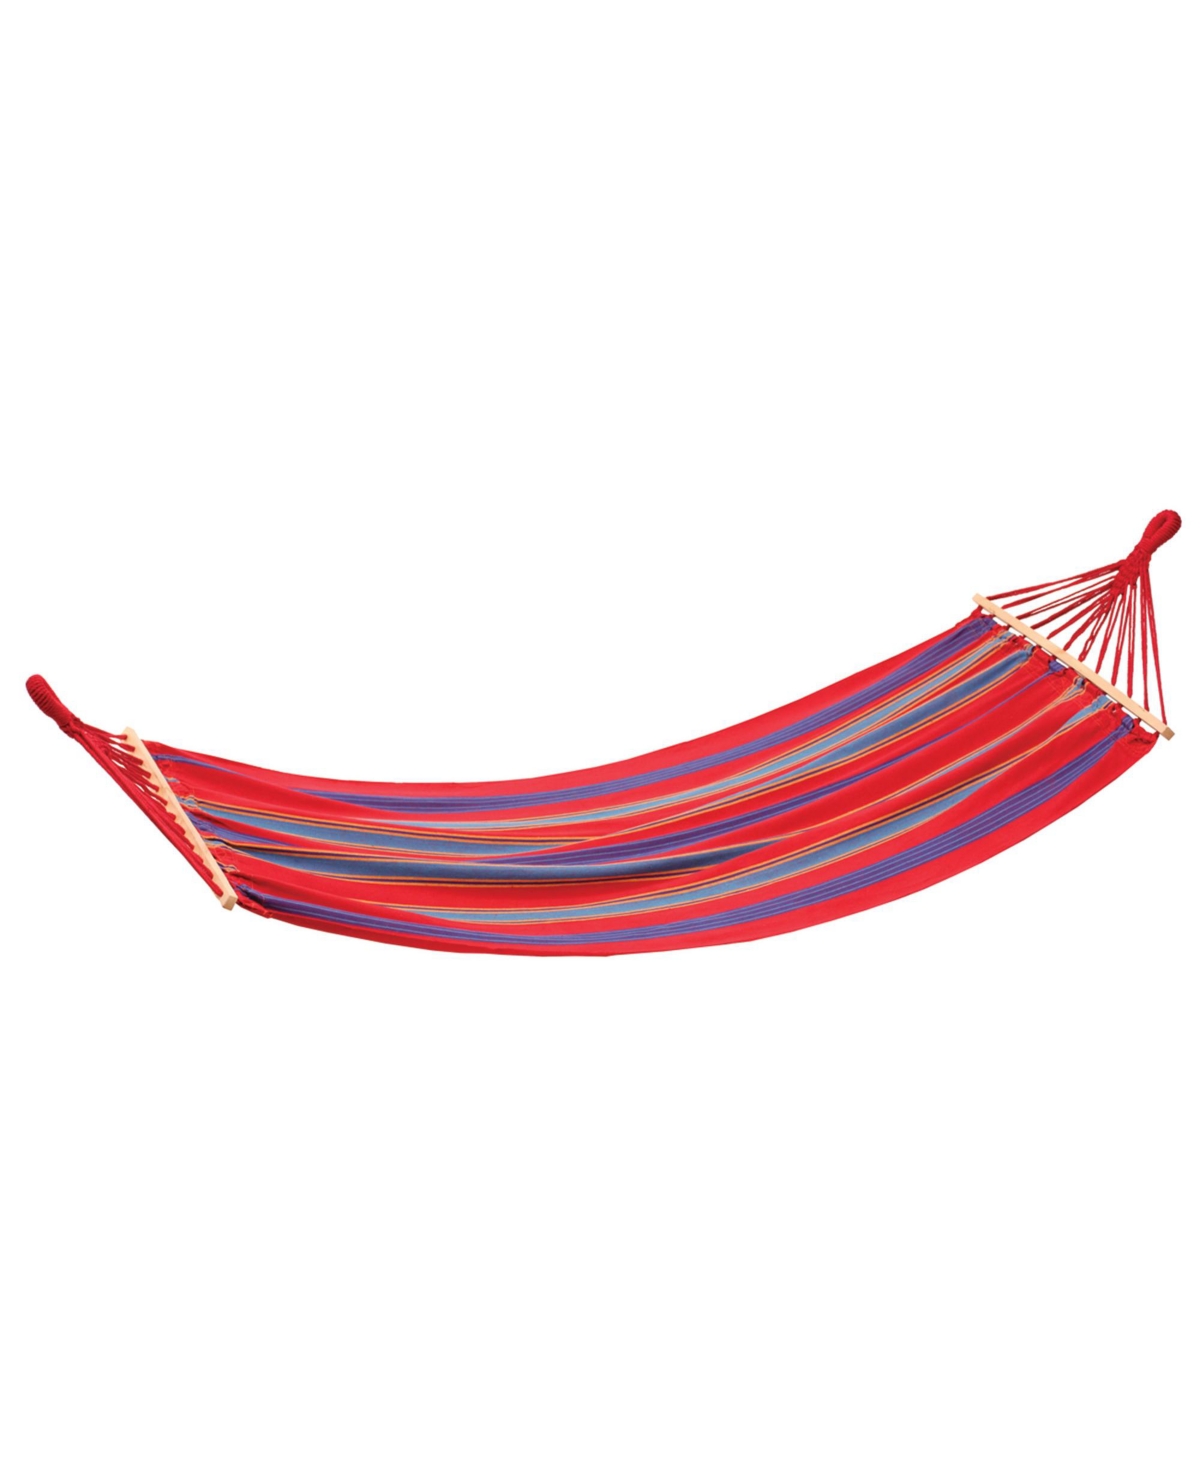 Cotton Blend Bahamas Hammock - Red - Red